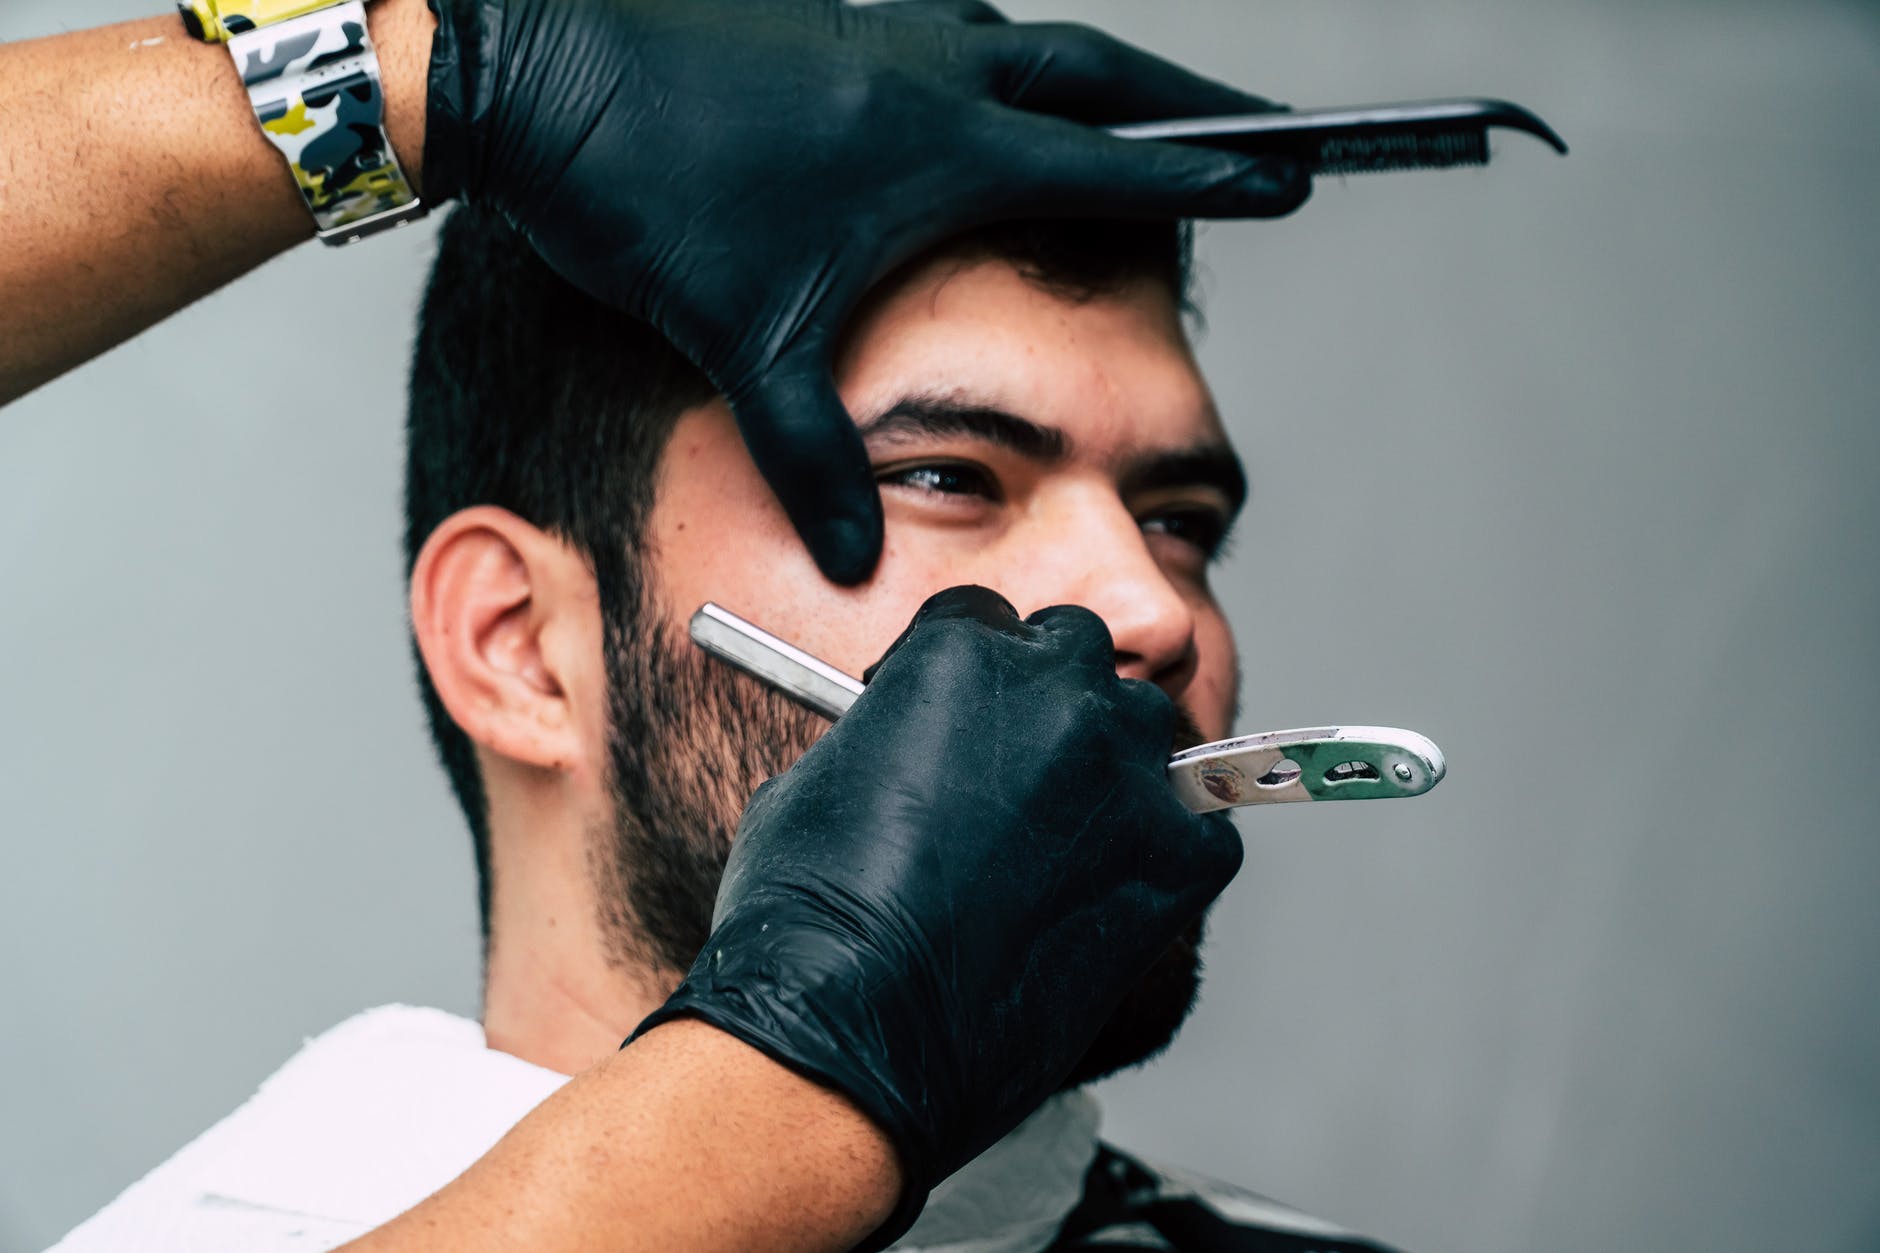 How To Shave Your Face: A Guide To Men’s Shaving